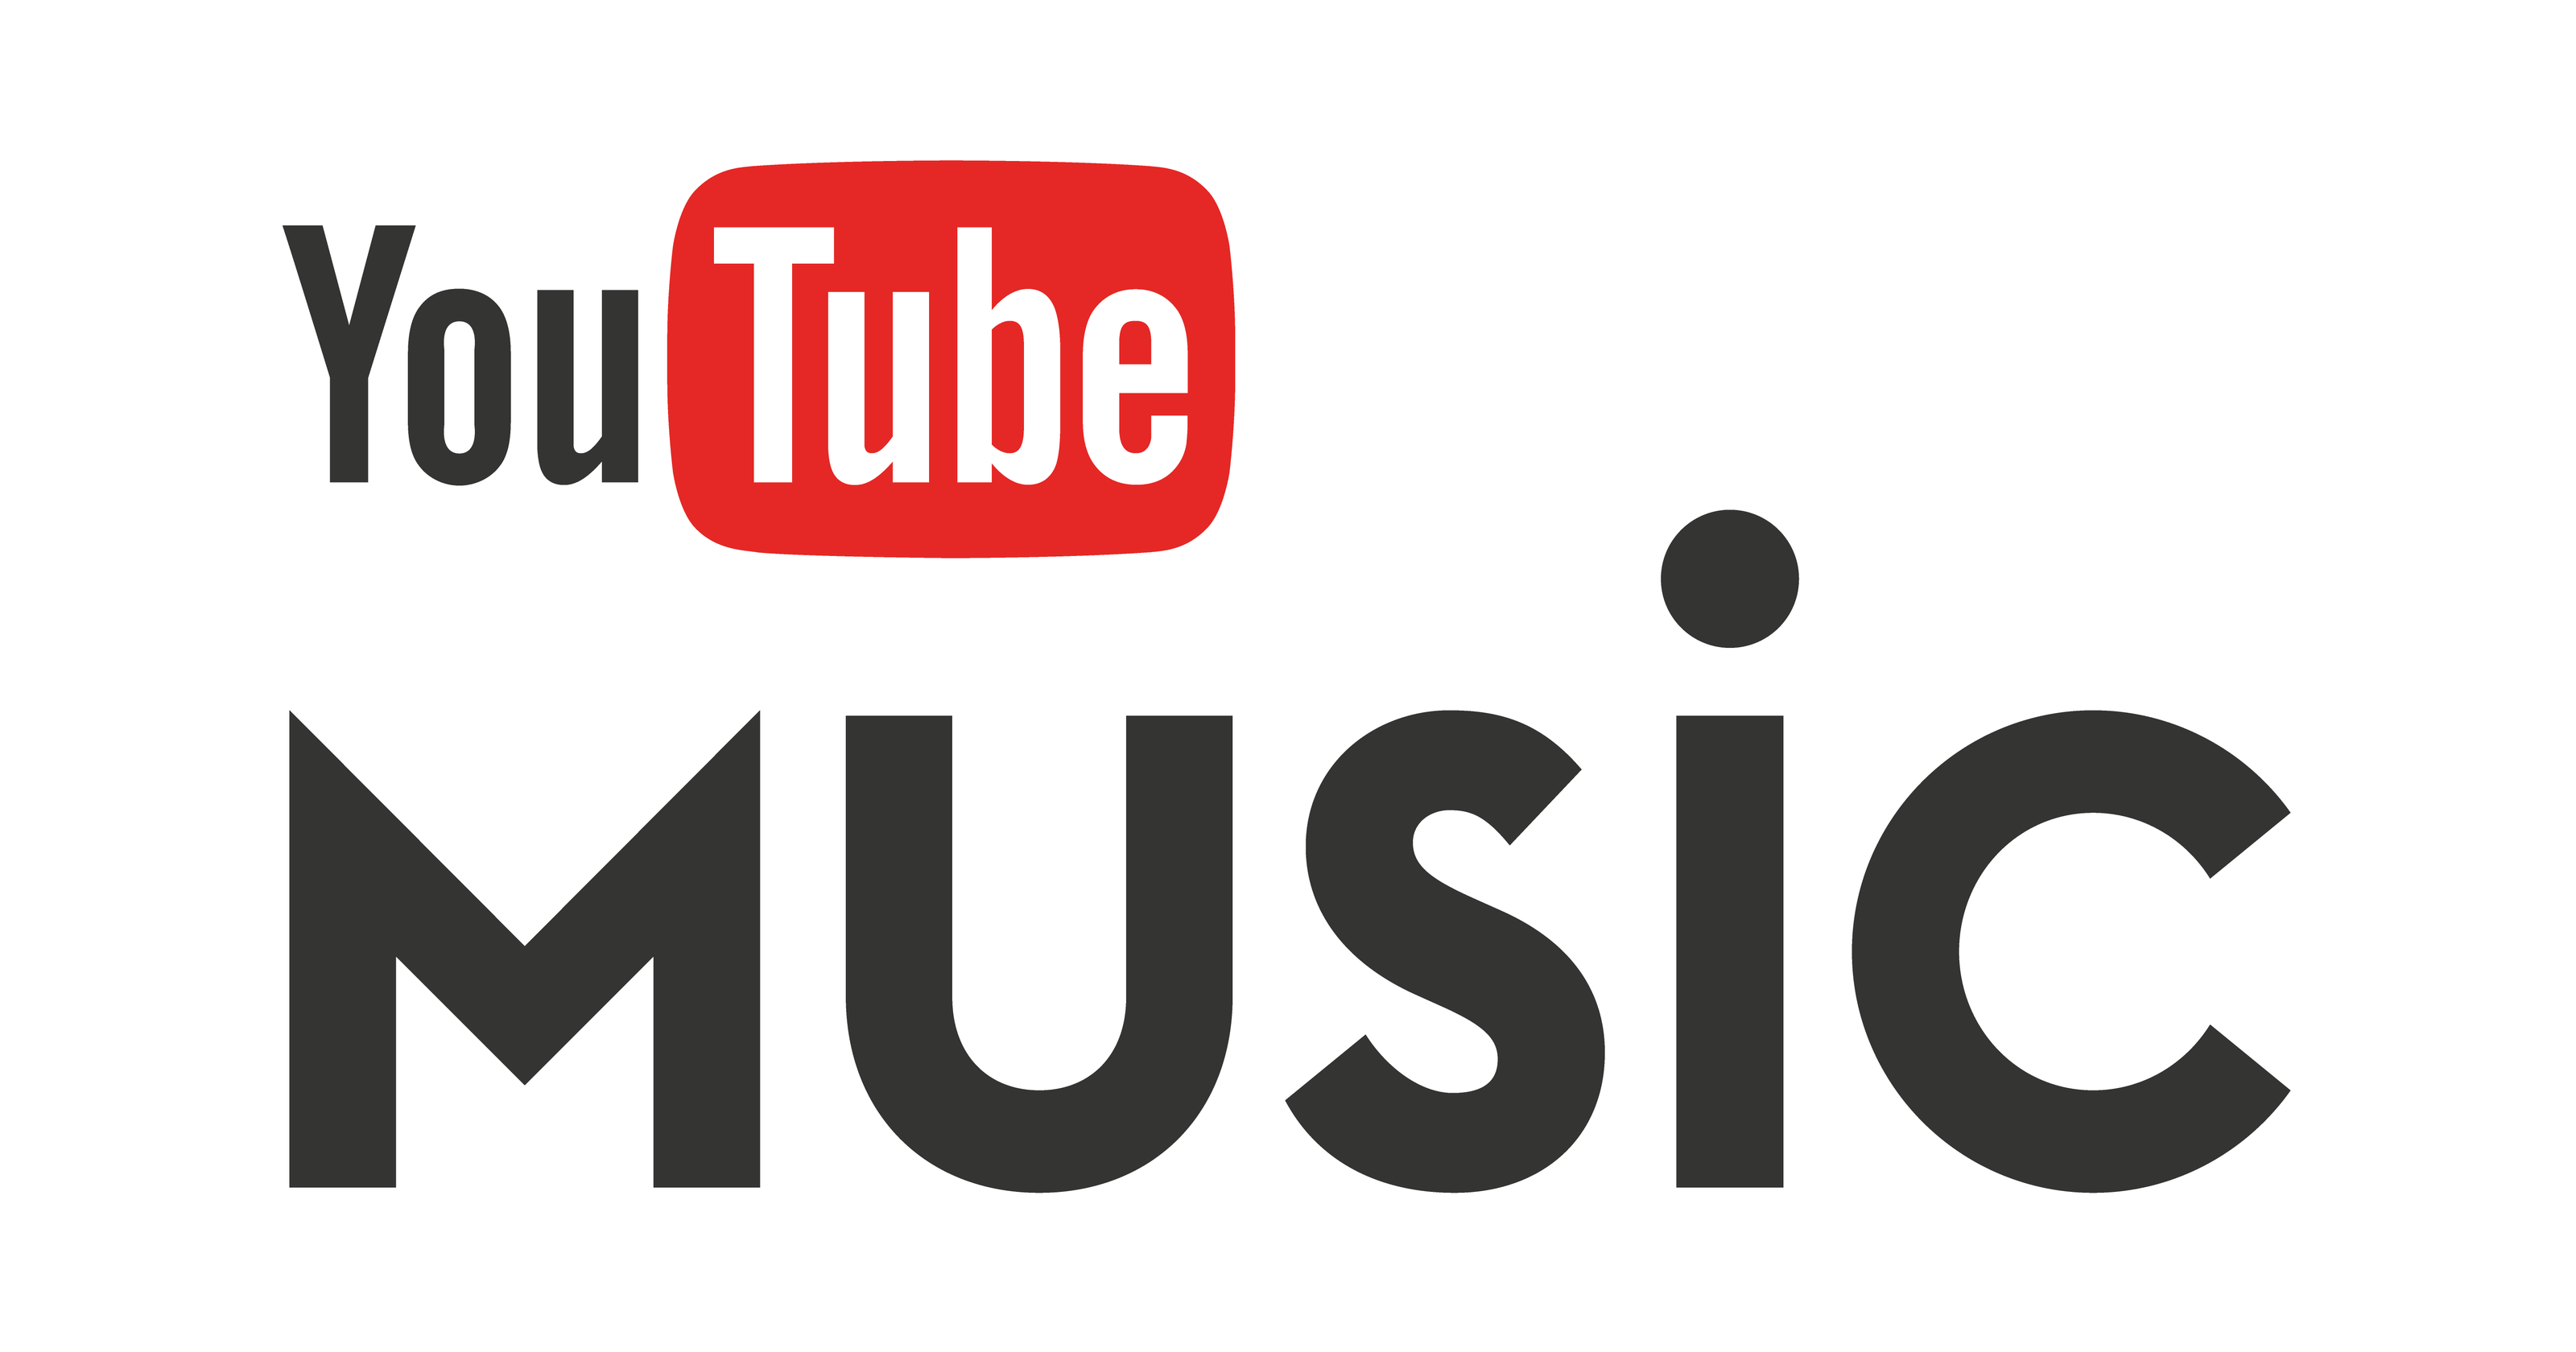 YouTube Music: What You Need to Know يوتيوب موسيقى ما تحتاج ان تعرفه